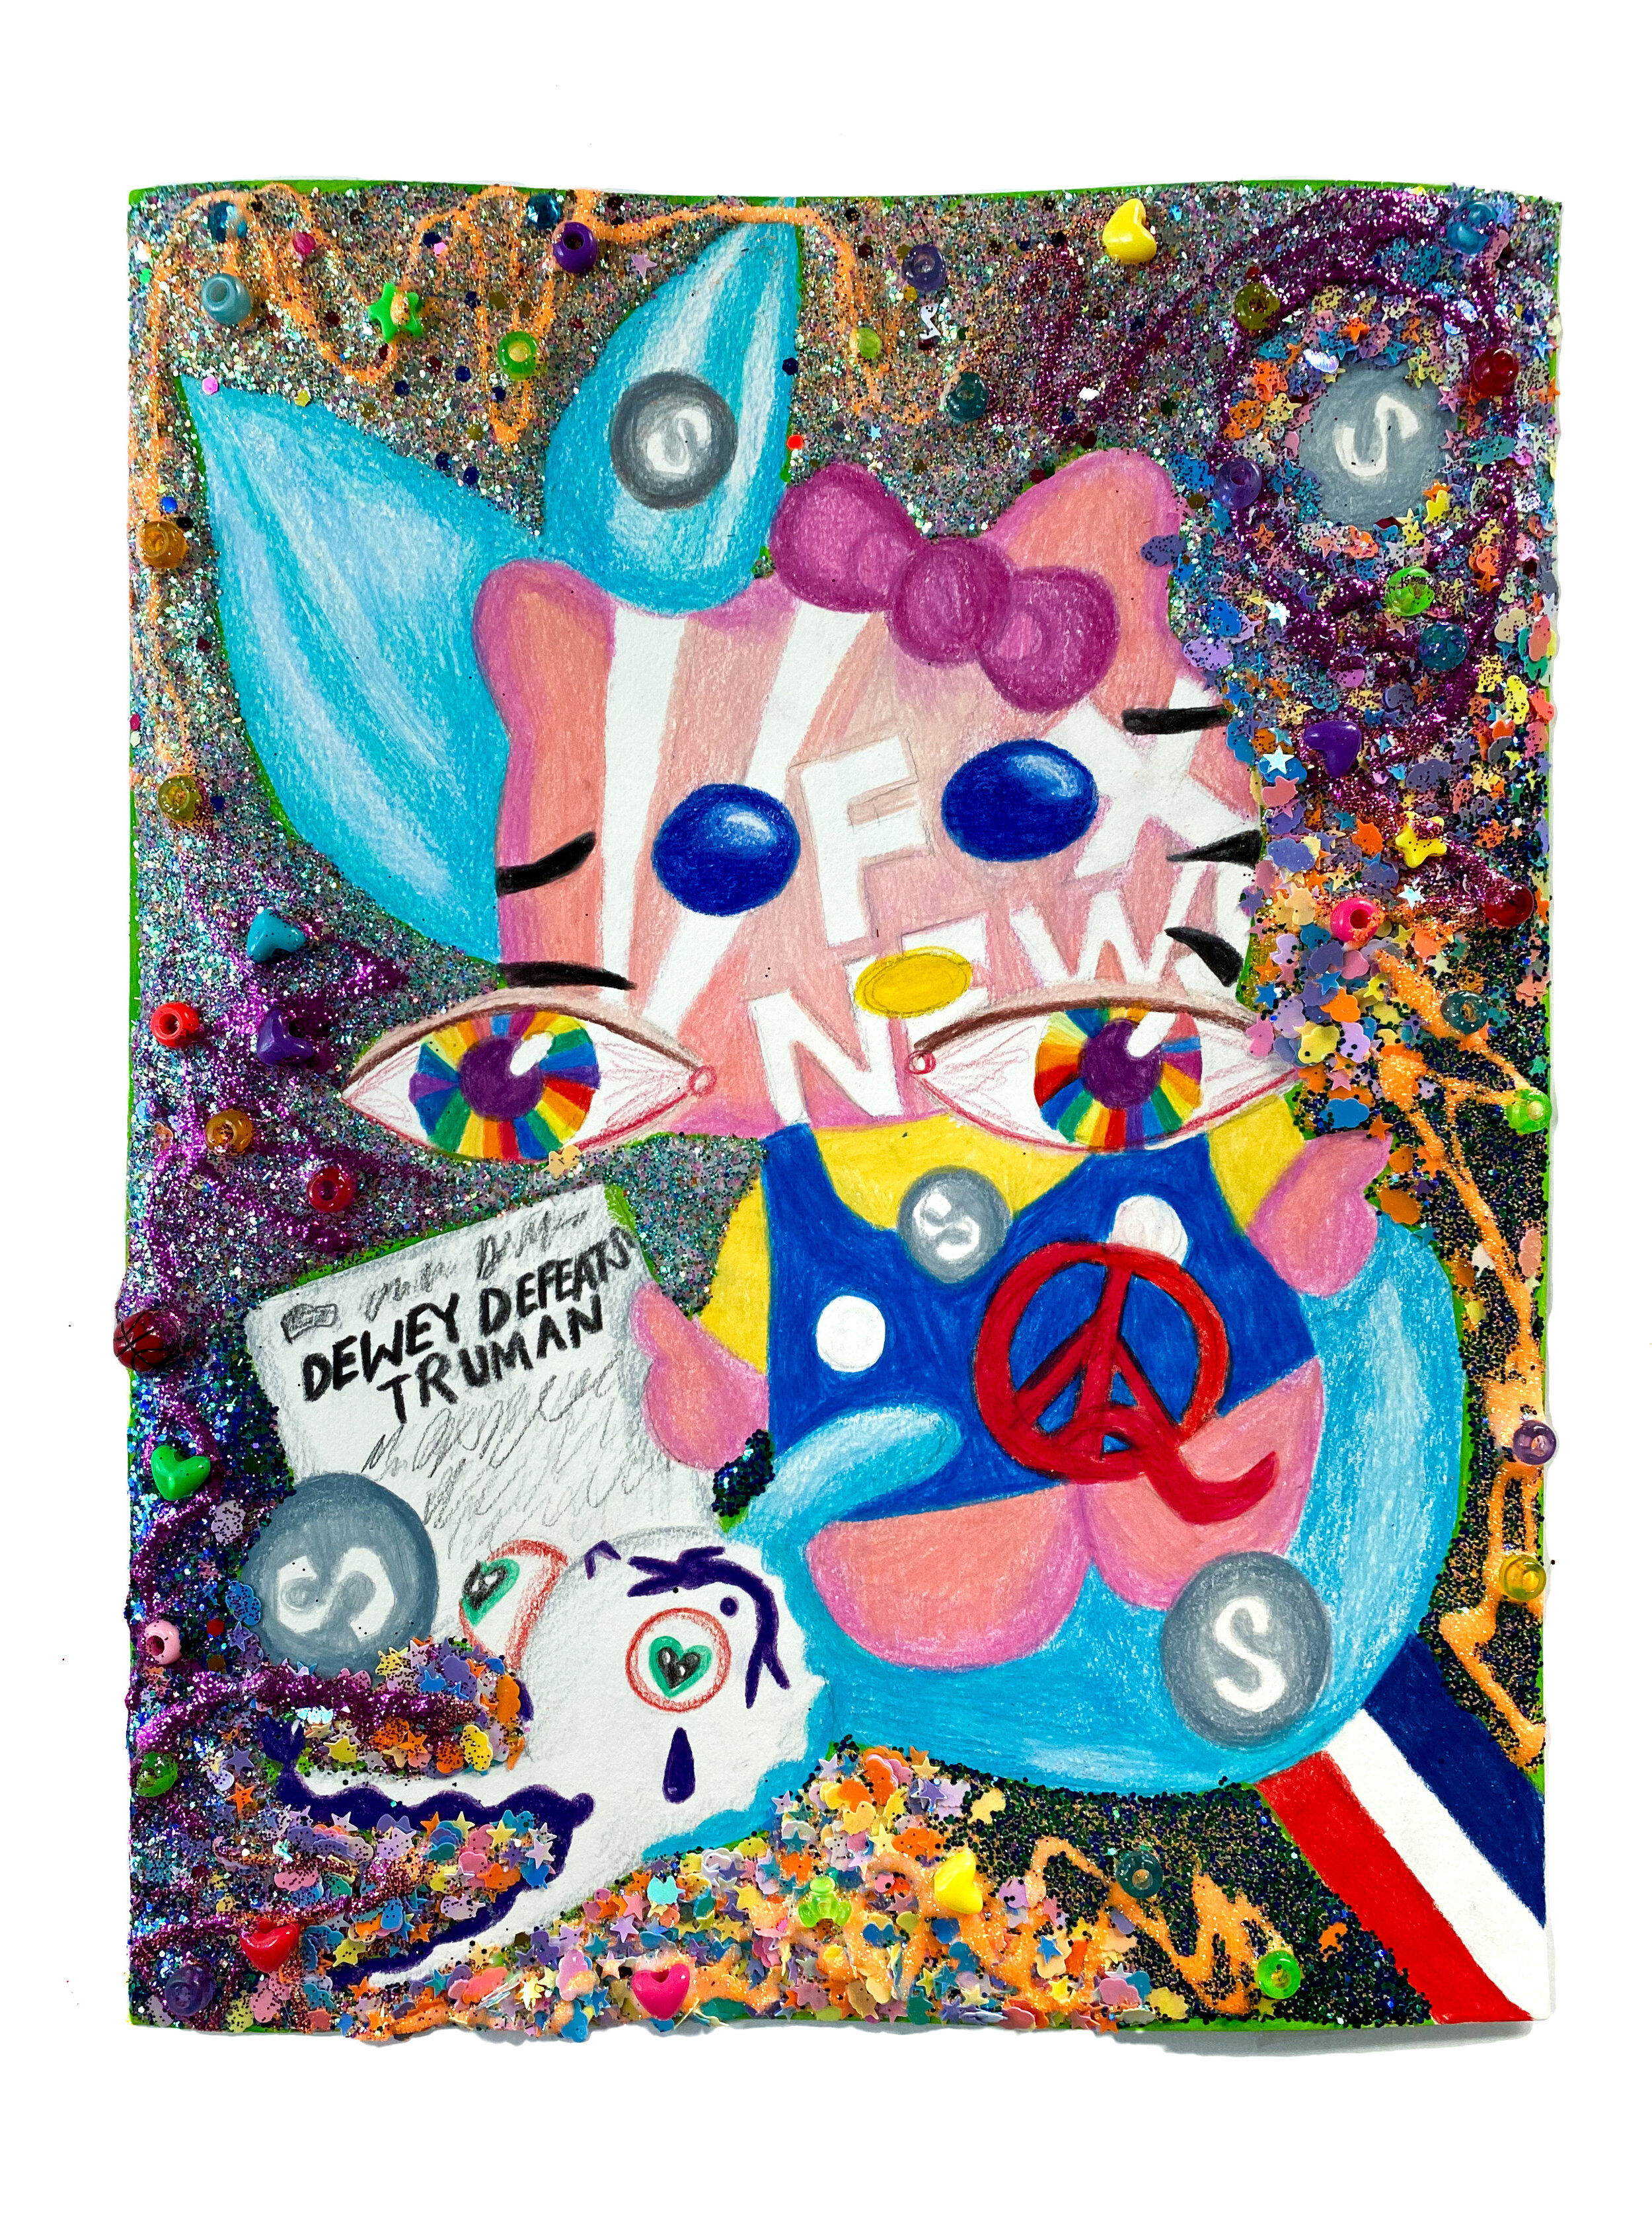   Hello Kitty Funko Pop with Pink Fox News Face Paint Riding a Clown Dolphin with Gray Pride Skittles while Gay Eyes Watch , 2021  14 x 11 inches (38.1 x 27.94 cm.)  Colored pencil, acrylic paint, Elmer's glue, Modge Podge, plastic beads, and glitter